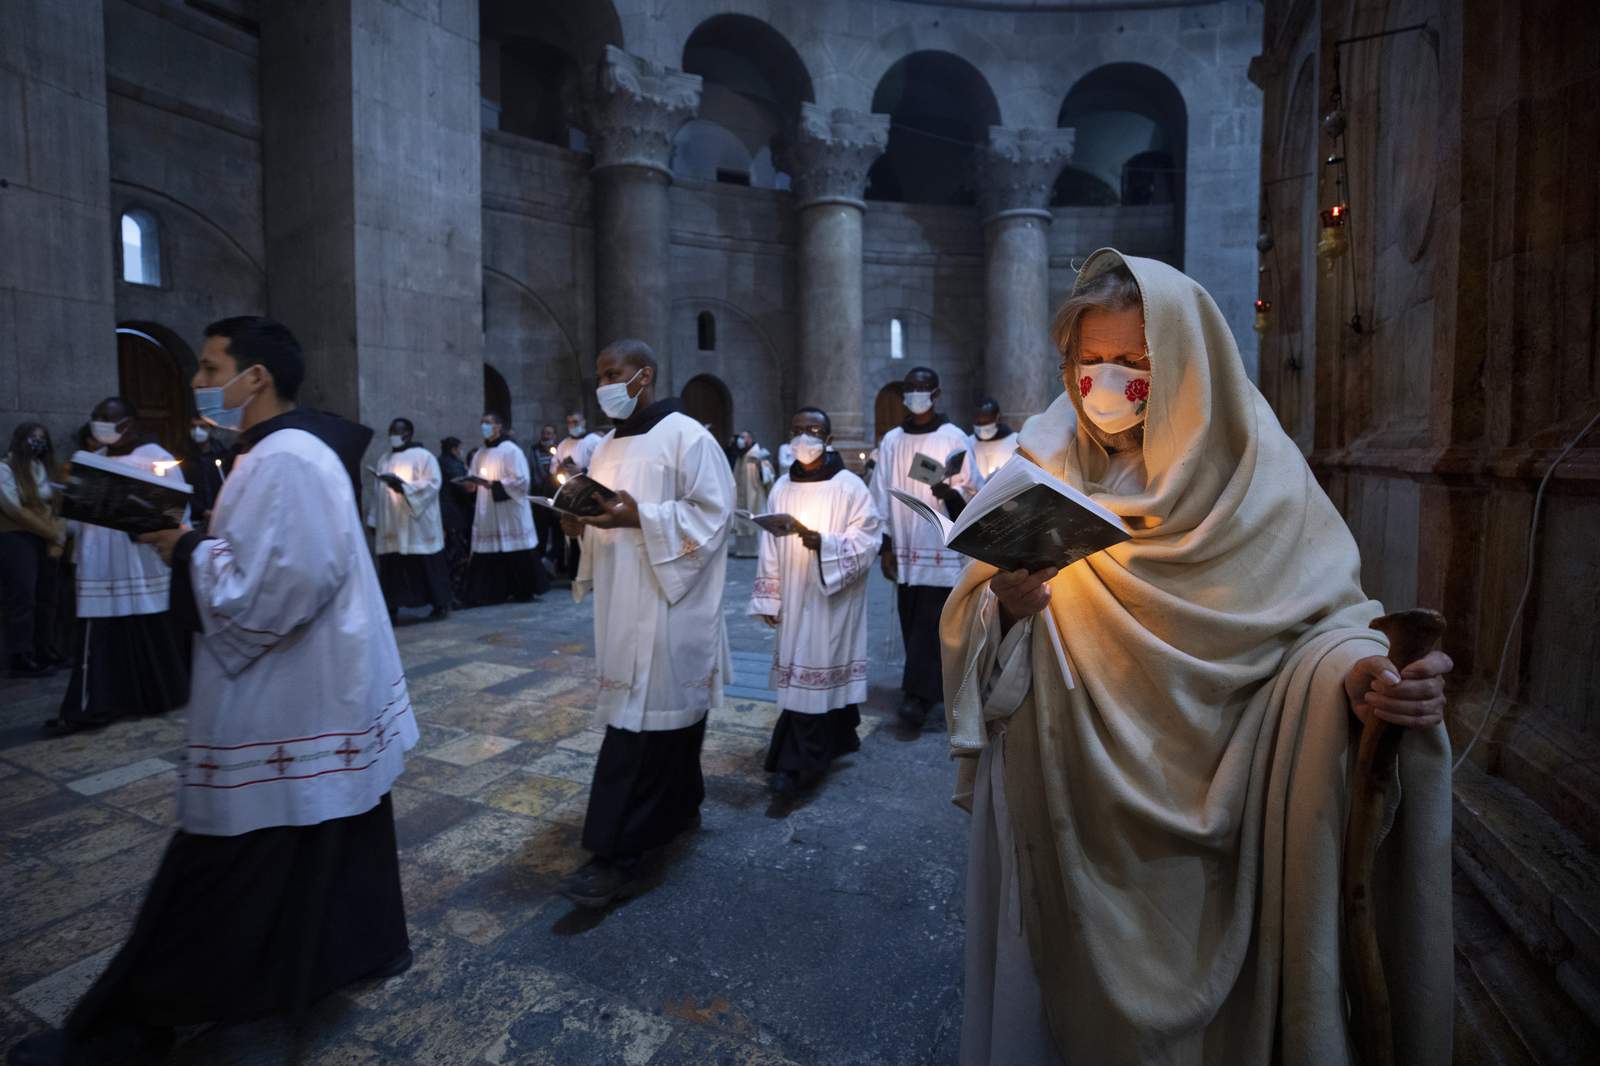 Hymns through masks: Christians mark another pandemic Easter